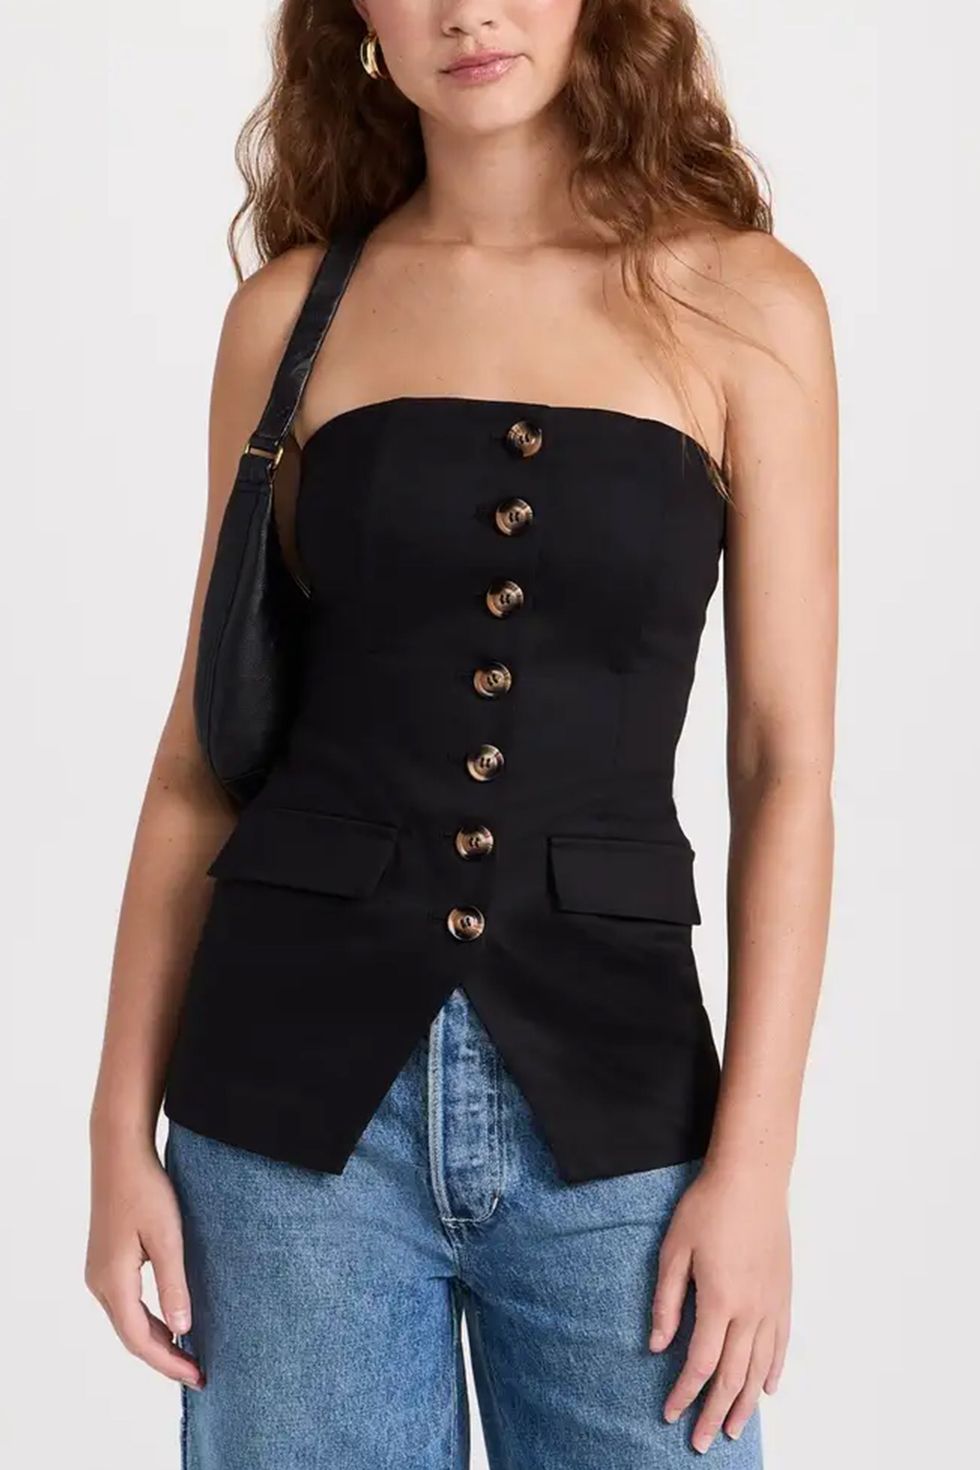 The Phoebe Strapless Bustier Top